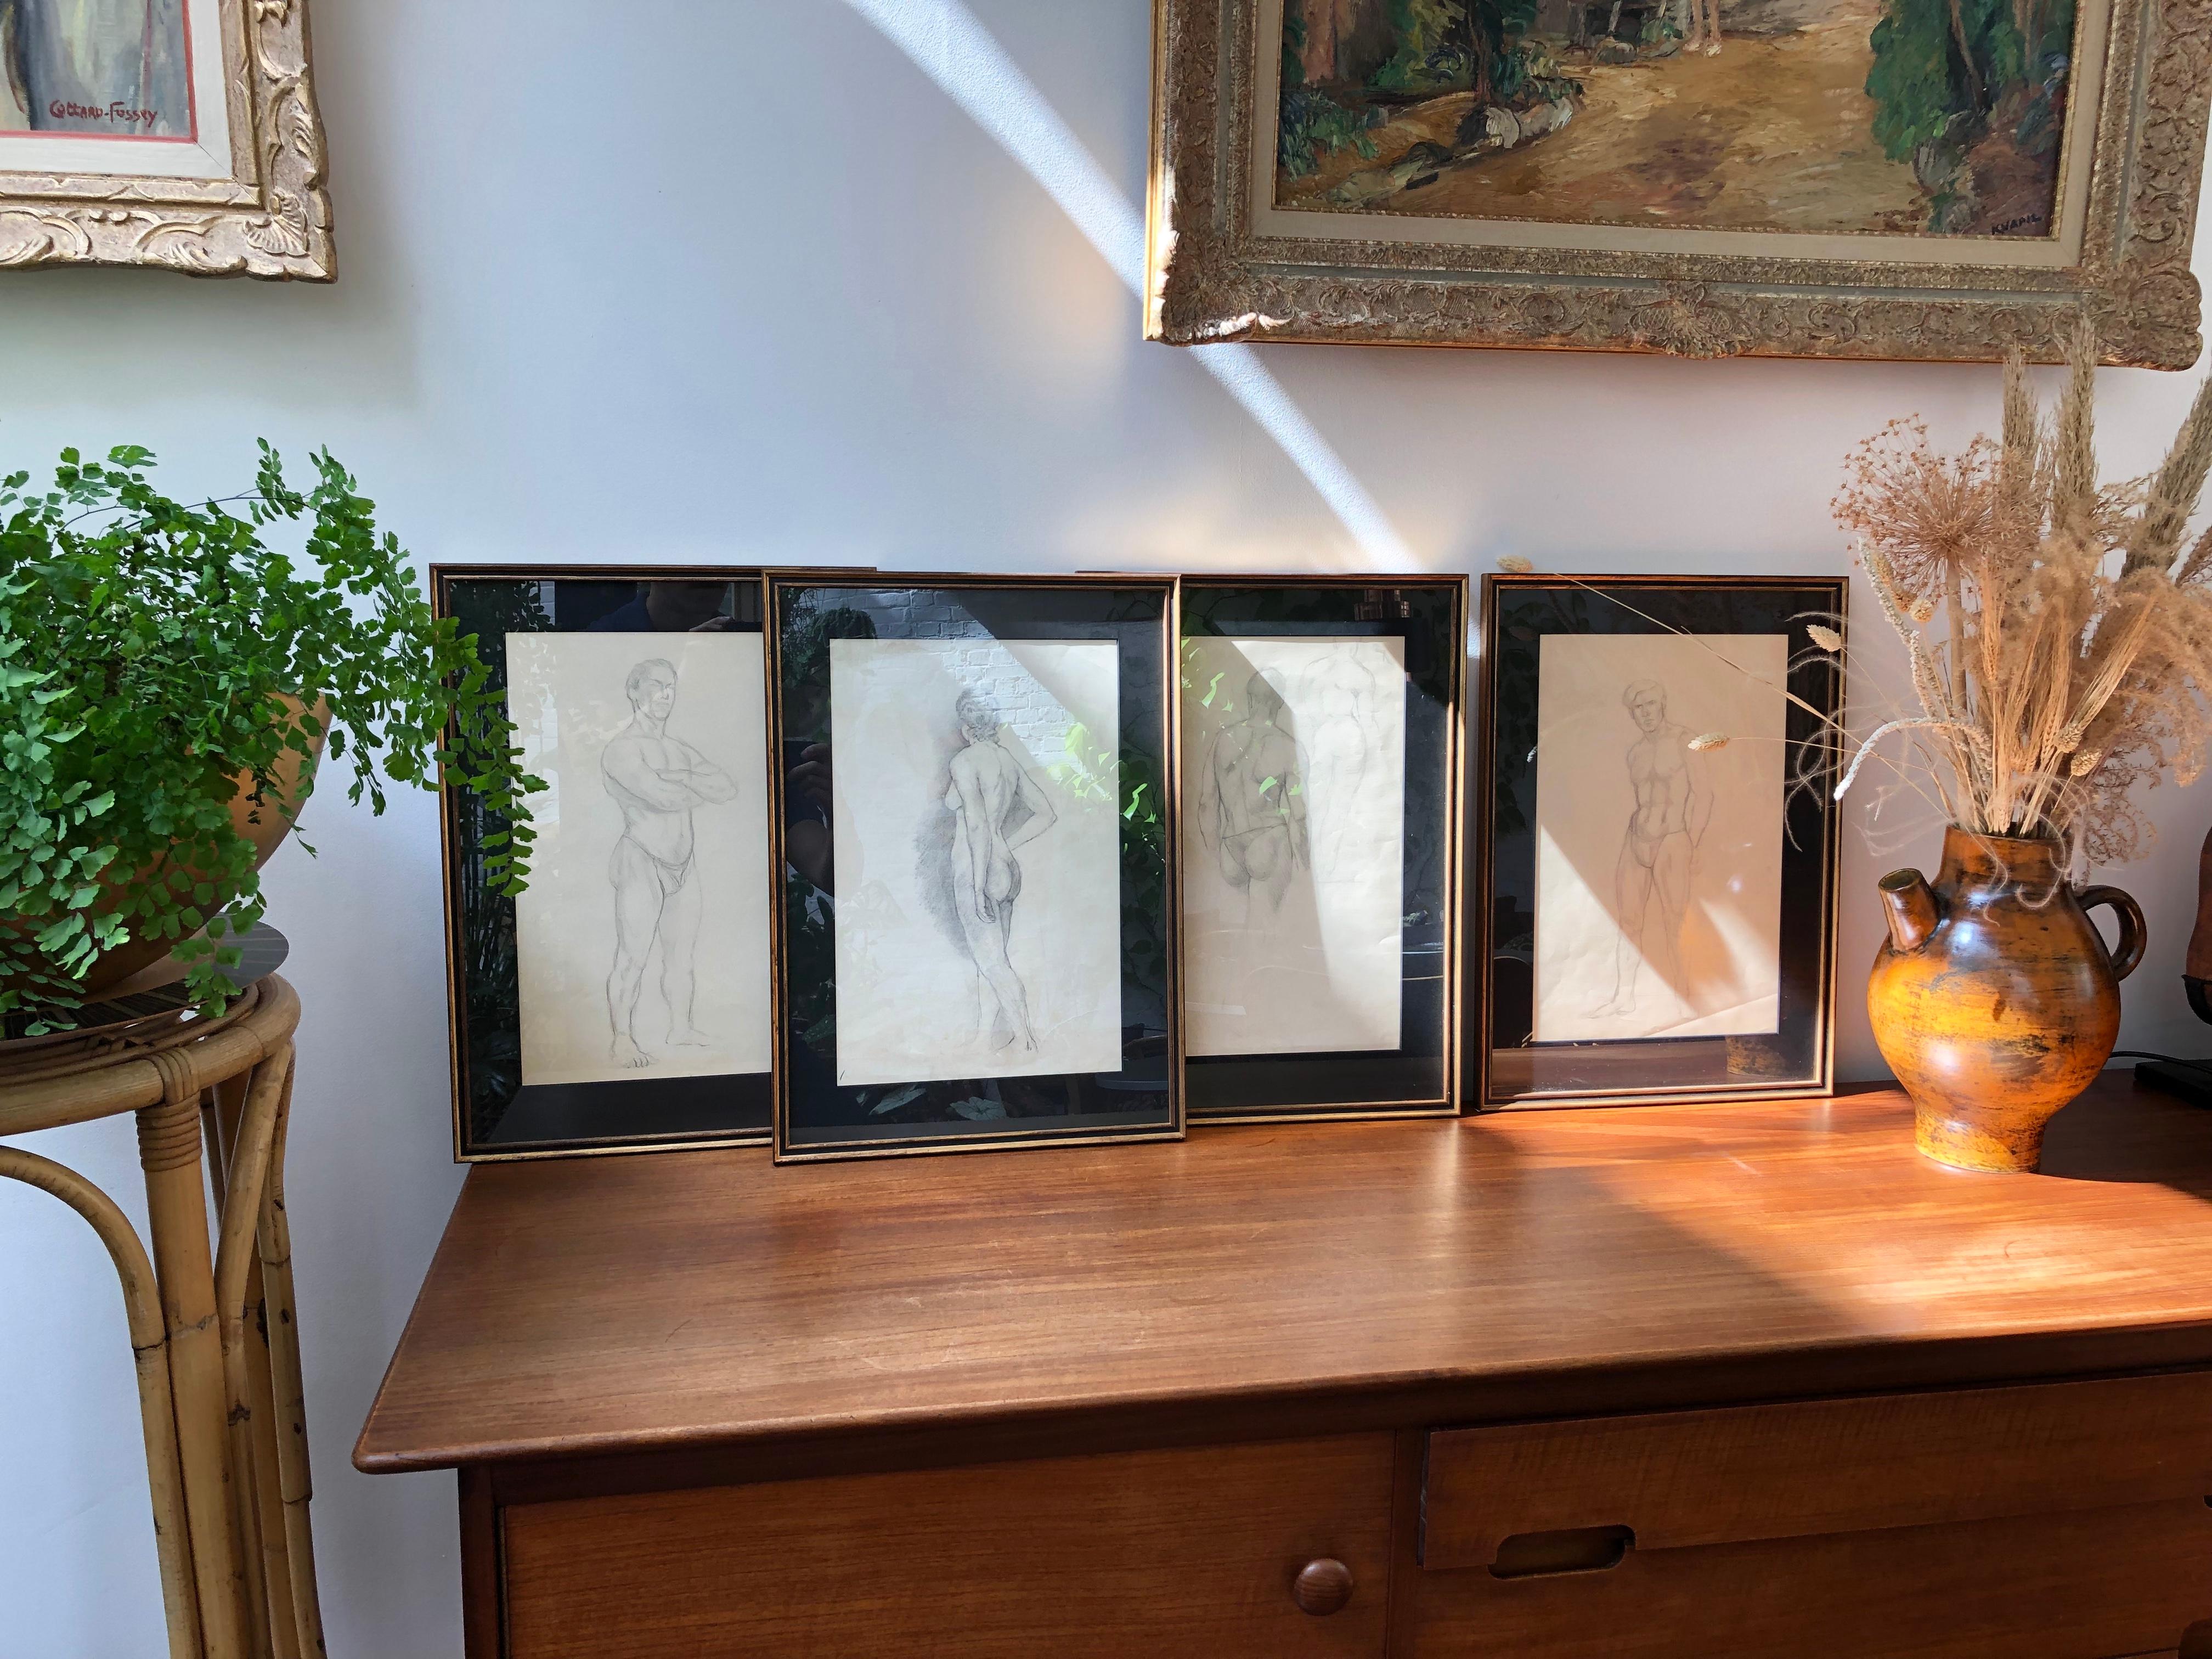 Set of four framed pencil drawings on wove paper (circa 1900-1920), by Bernard Sleigh, RBSA (Provenance: from the artist's studio). An exquisite grouping of four drawings available together as one set. These sketches are possibly studies for larger